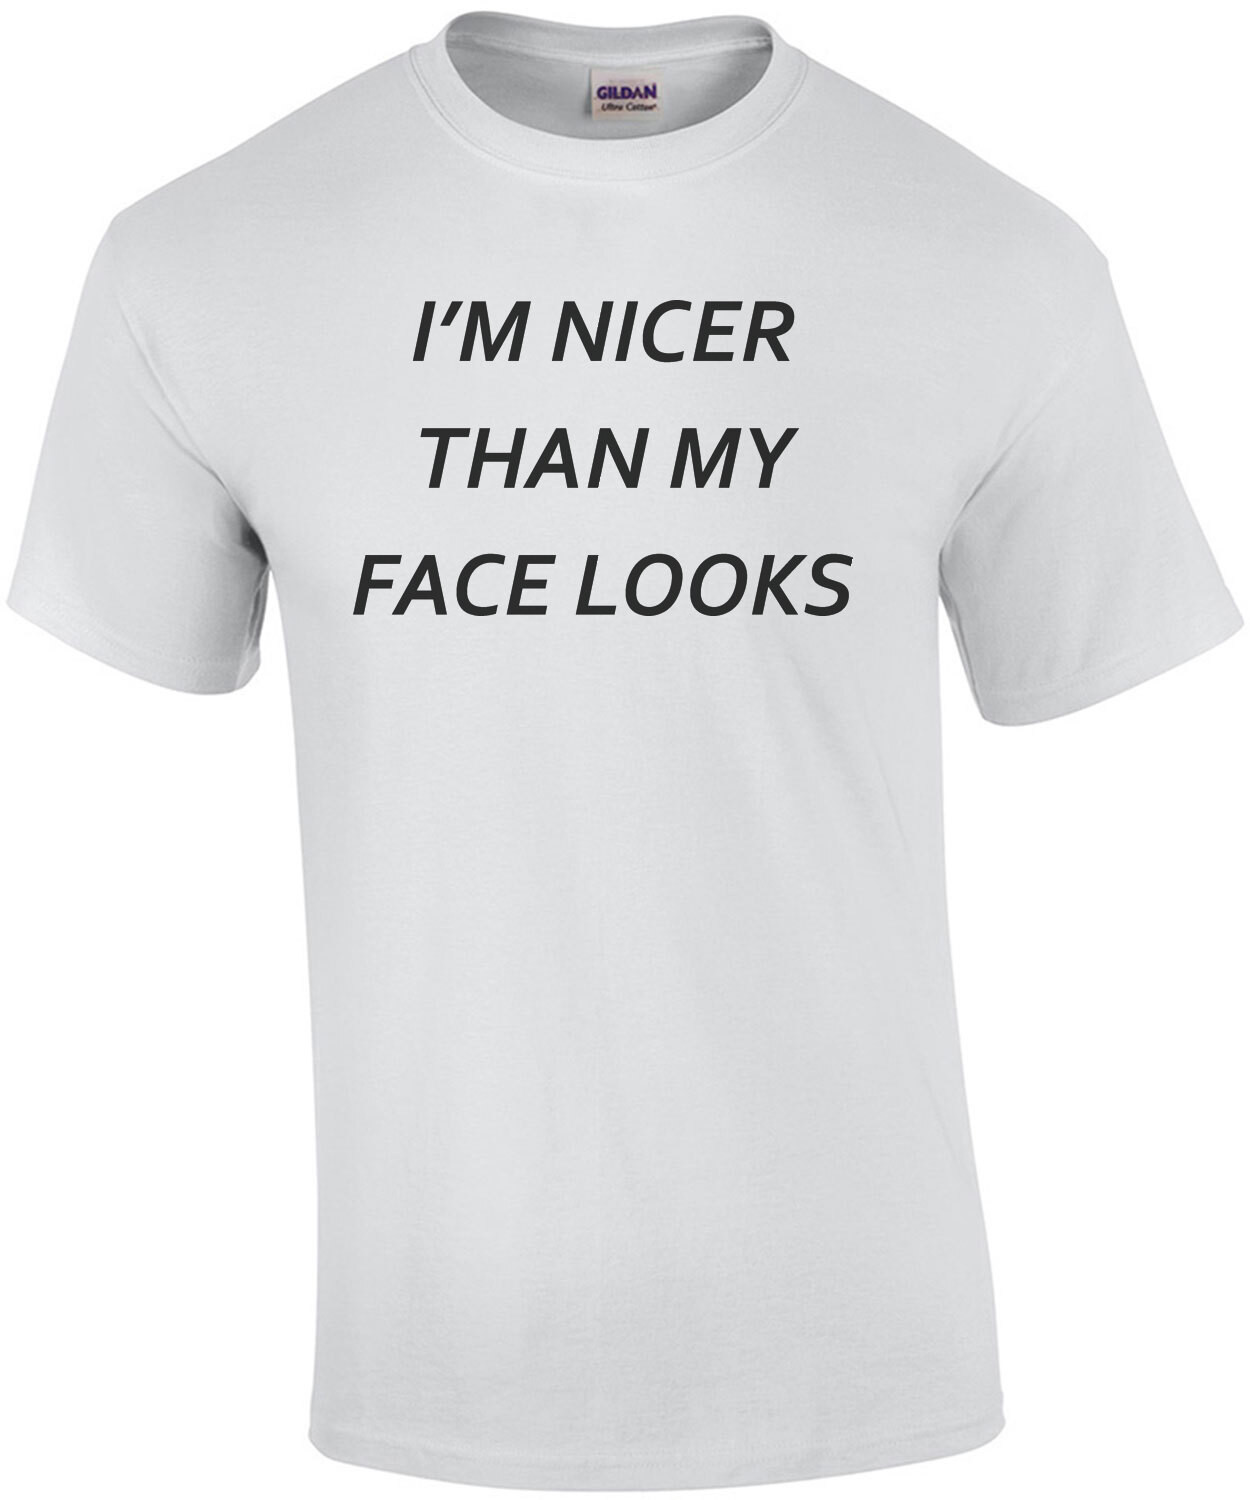 I'm nicer than my face looks - funny t-shirt